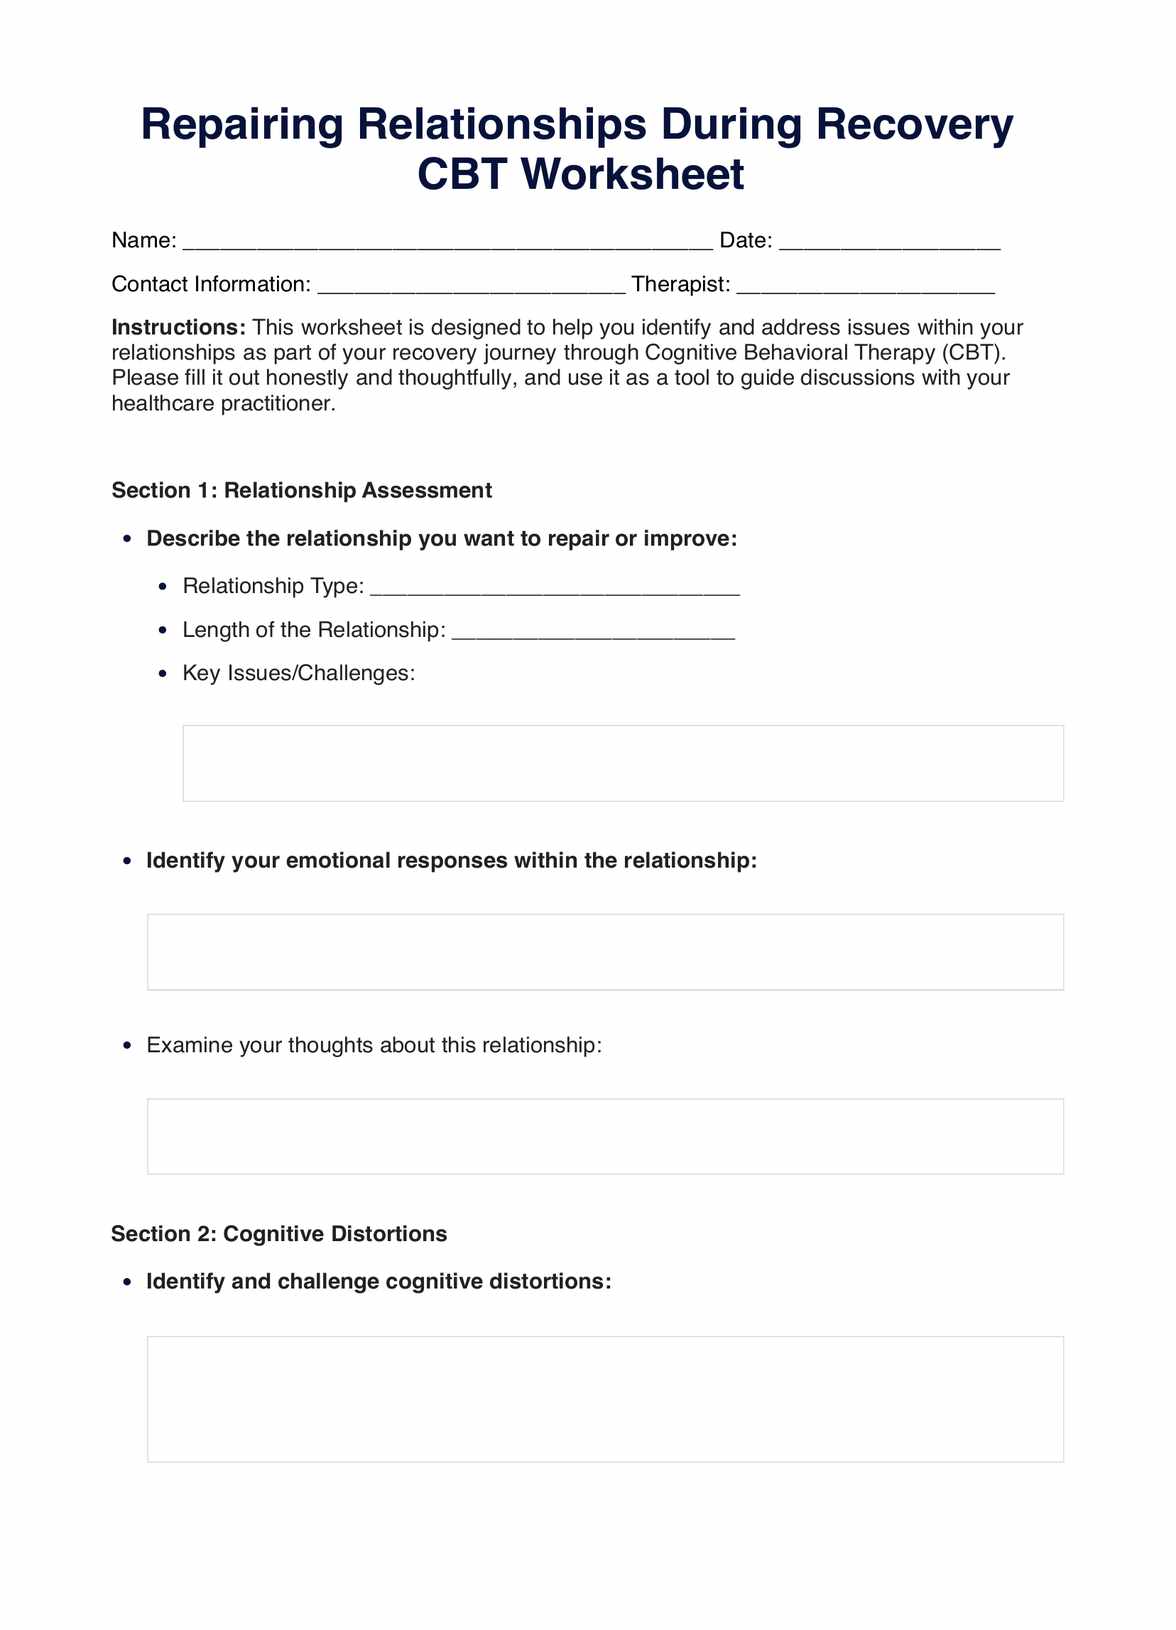 Repairing Relationships During Recovery CBT Worksheet PDF Example